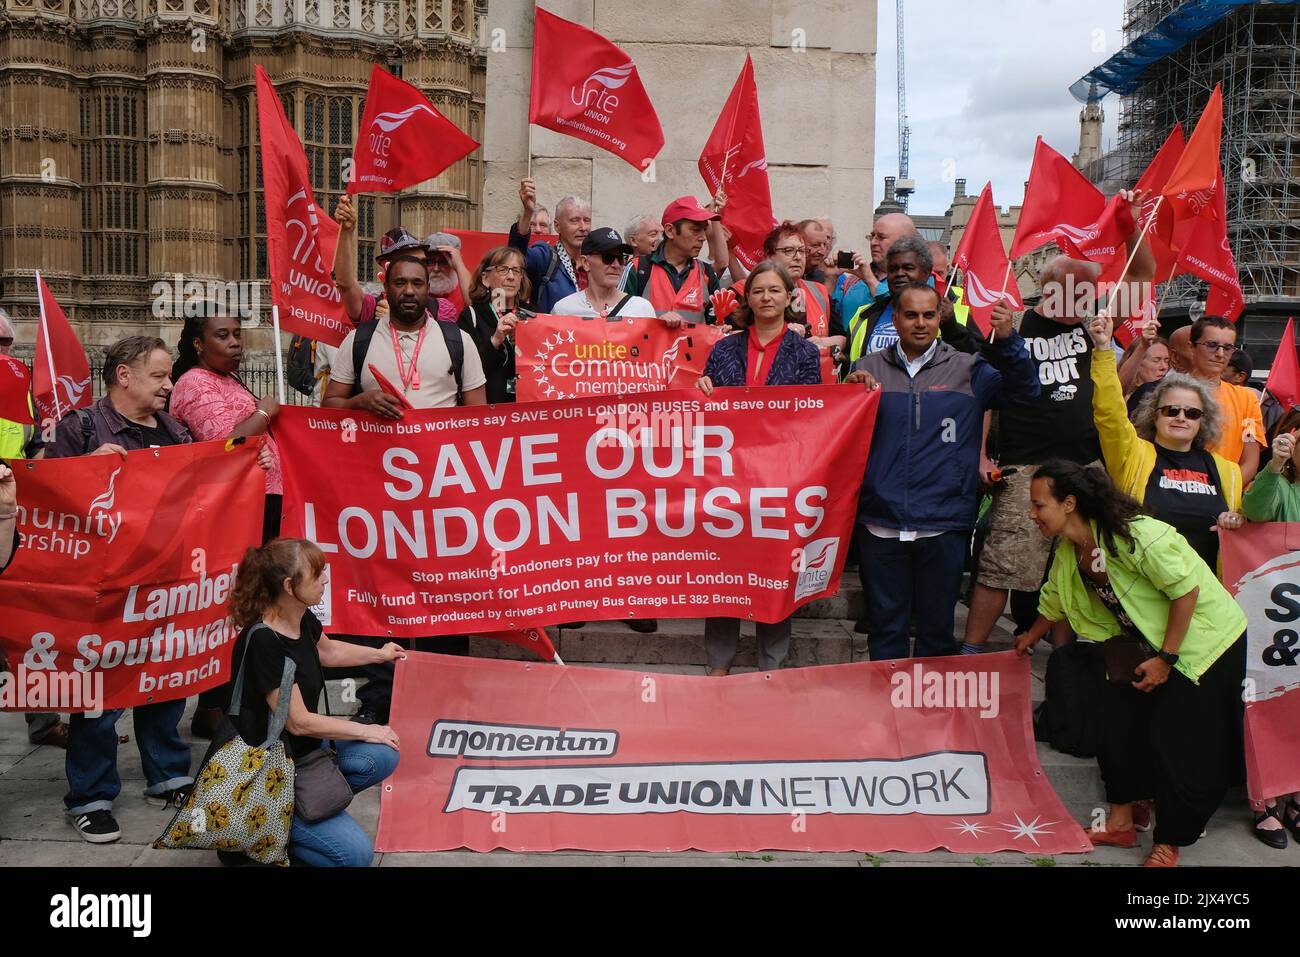 London, UK. 6th September, 2022. Members of the Unite Union stand with banners at an organised rally, after proposed plans by Transport for London (TfL) to axe 16 bus services and make changes to 78 routes, in an bid to save money following a drastic reduction in income during the pandemic, with the organisation's finances facing a black hole with a £1.9bn funding gap. London is the only capital city in Europe to not have government subsidised transport. Credit: Eleventh Hour Photography/Alamy Live News Stock Photo